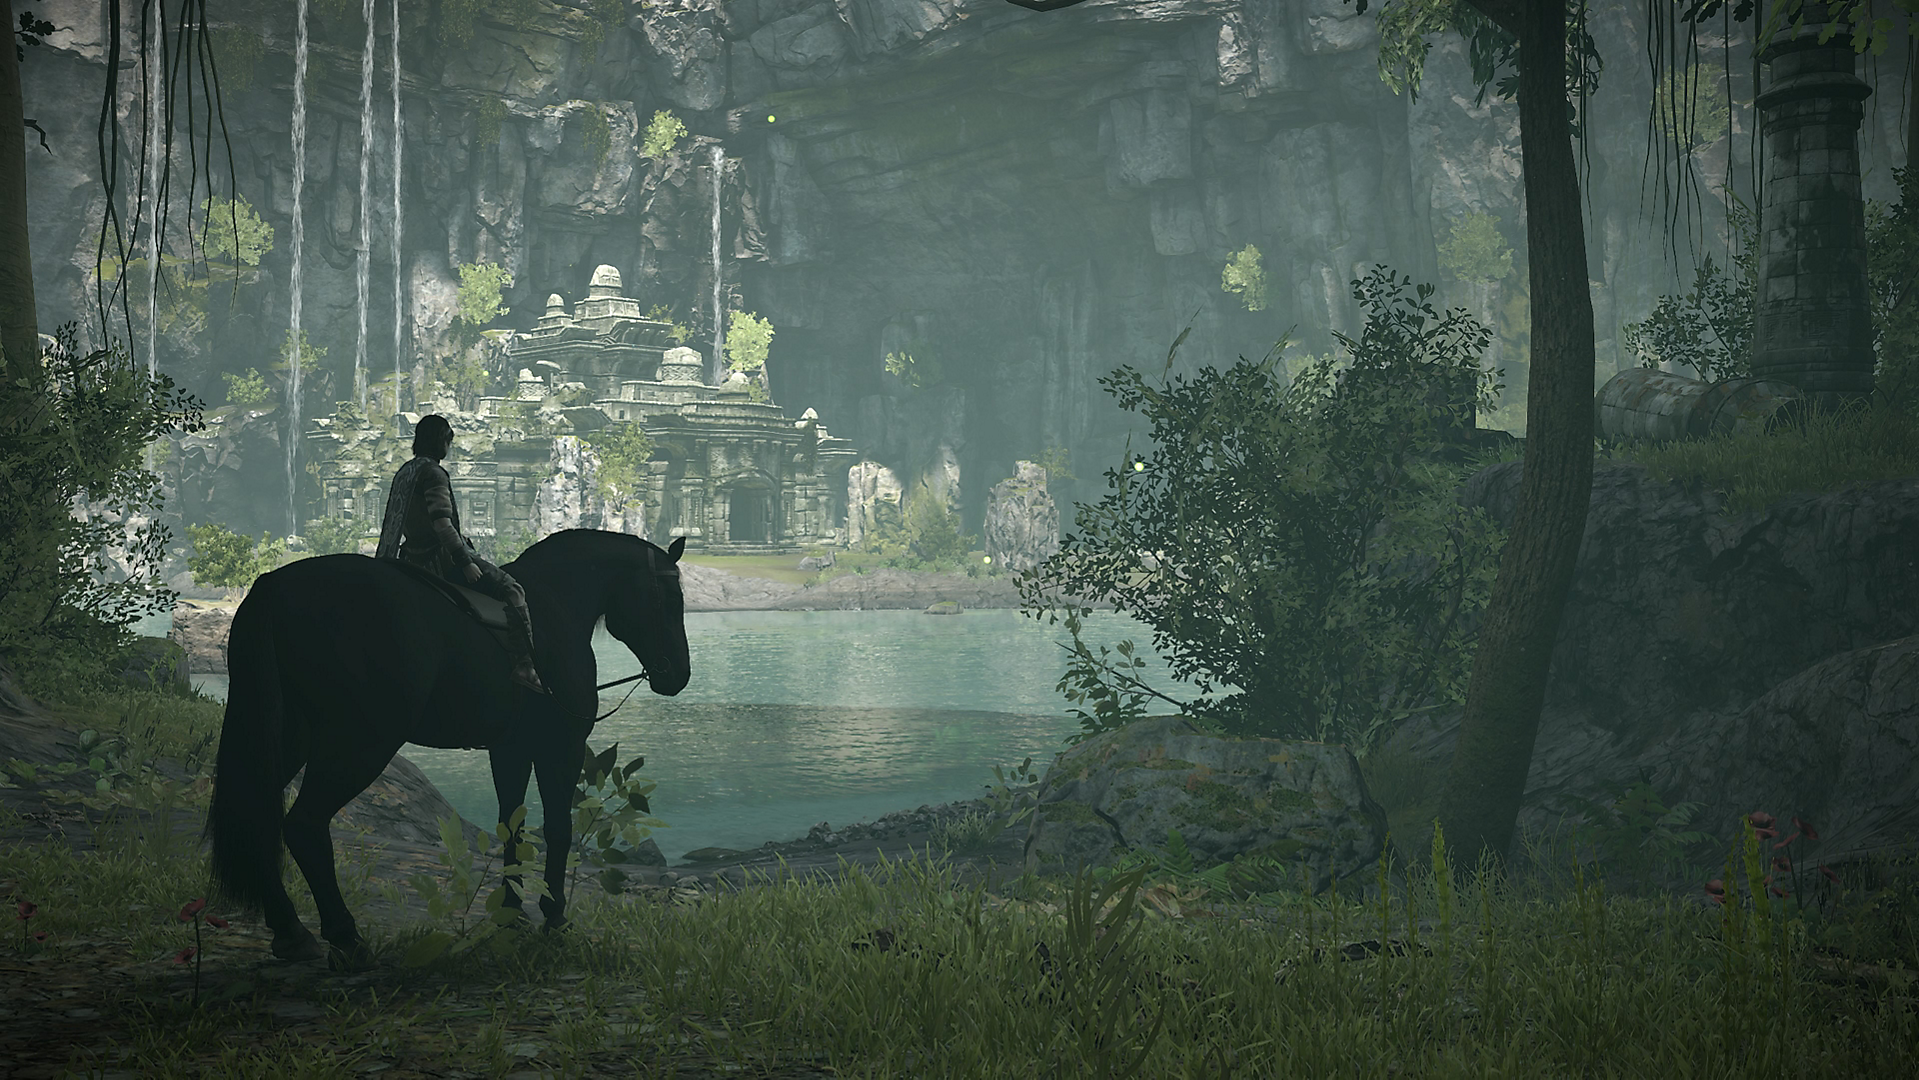 Shadow of the Colossus PS4 Trophy list: new trophies, and how hard is the  platinum?